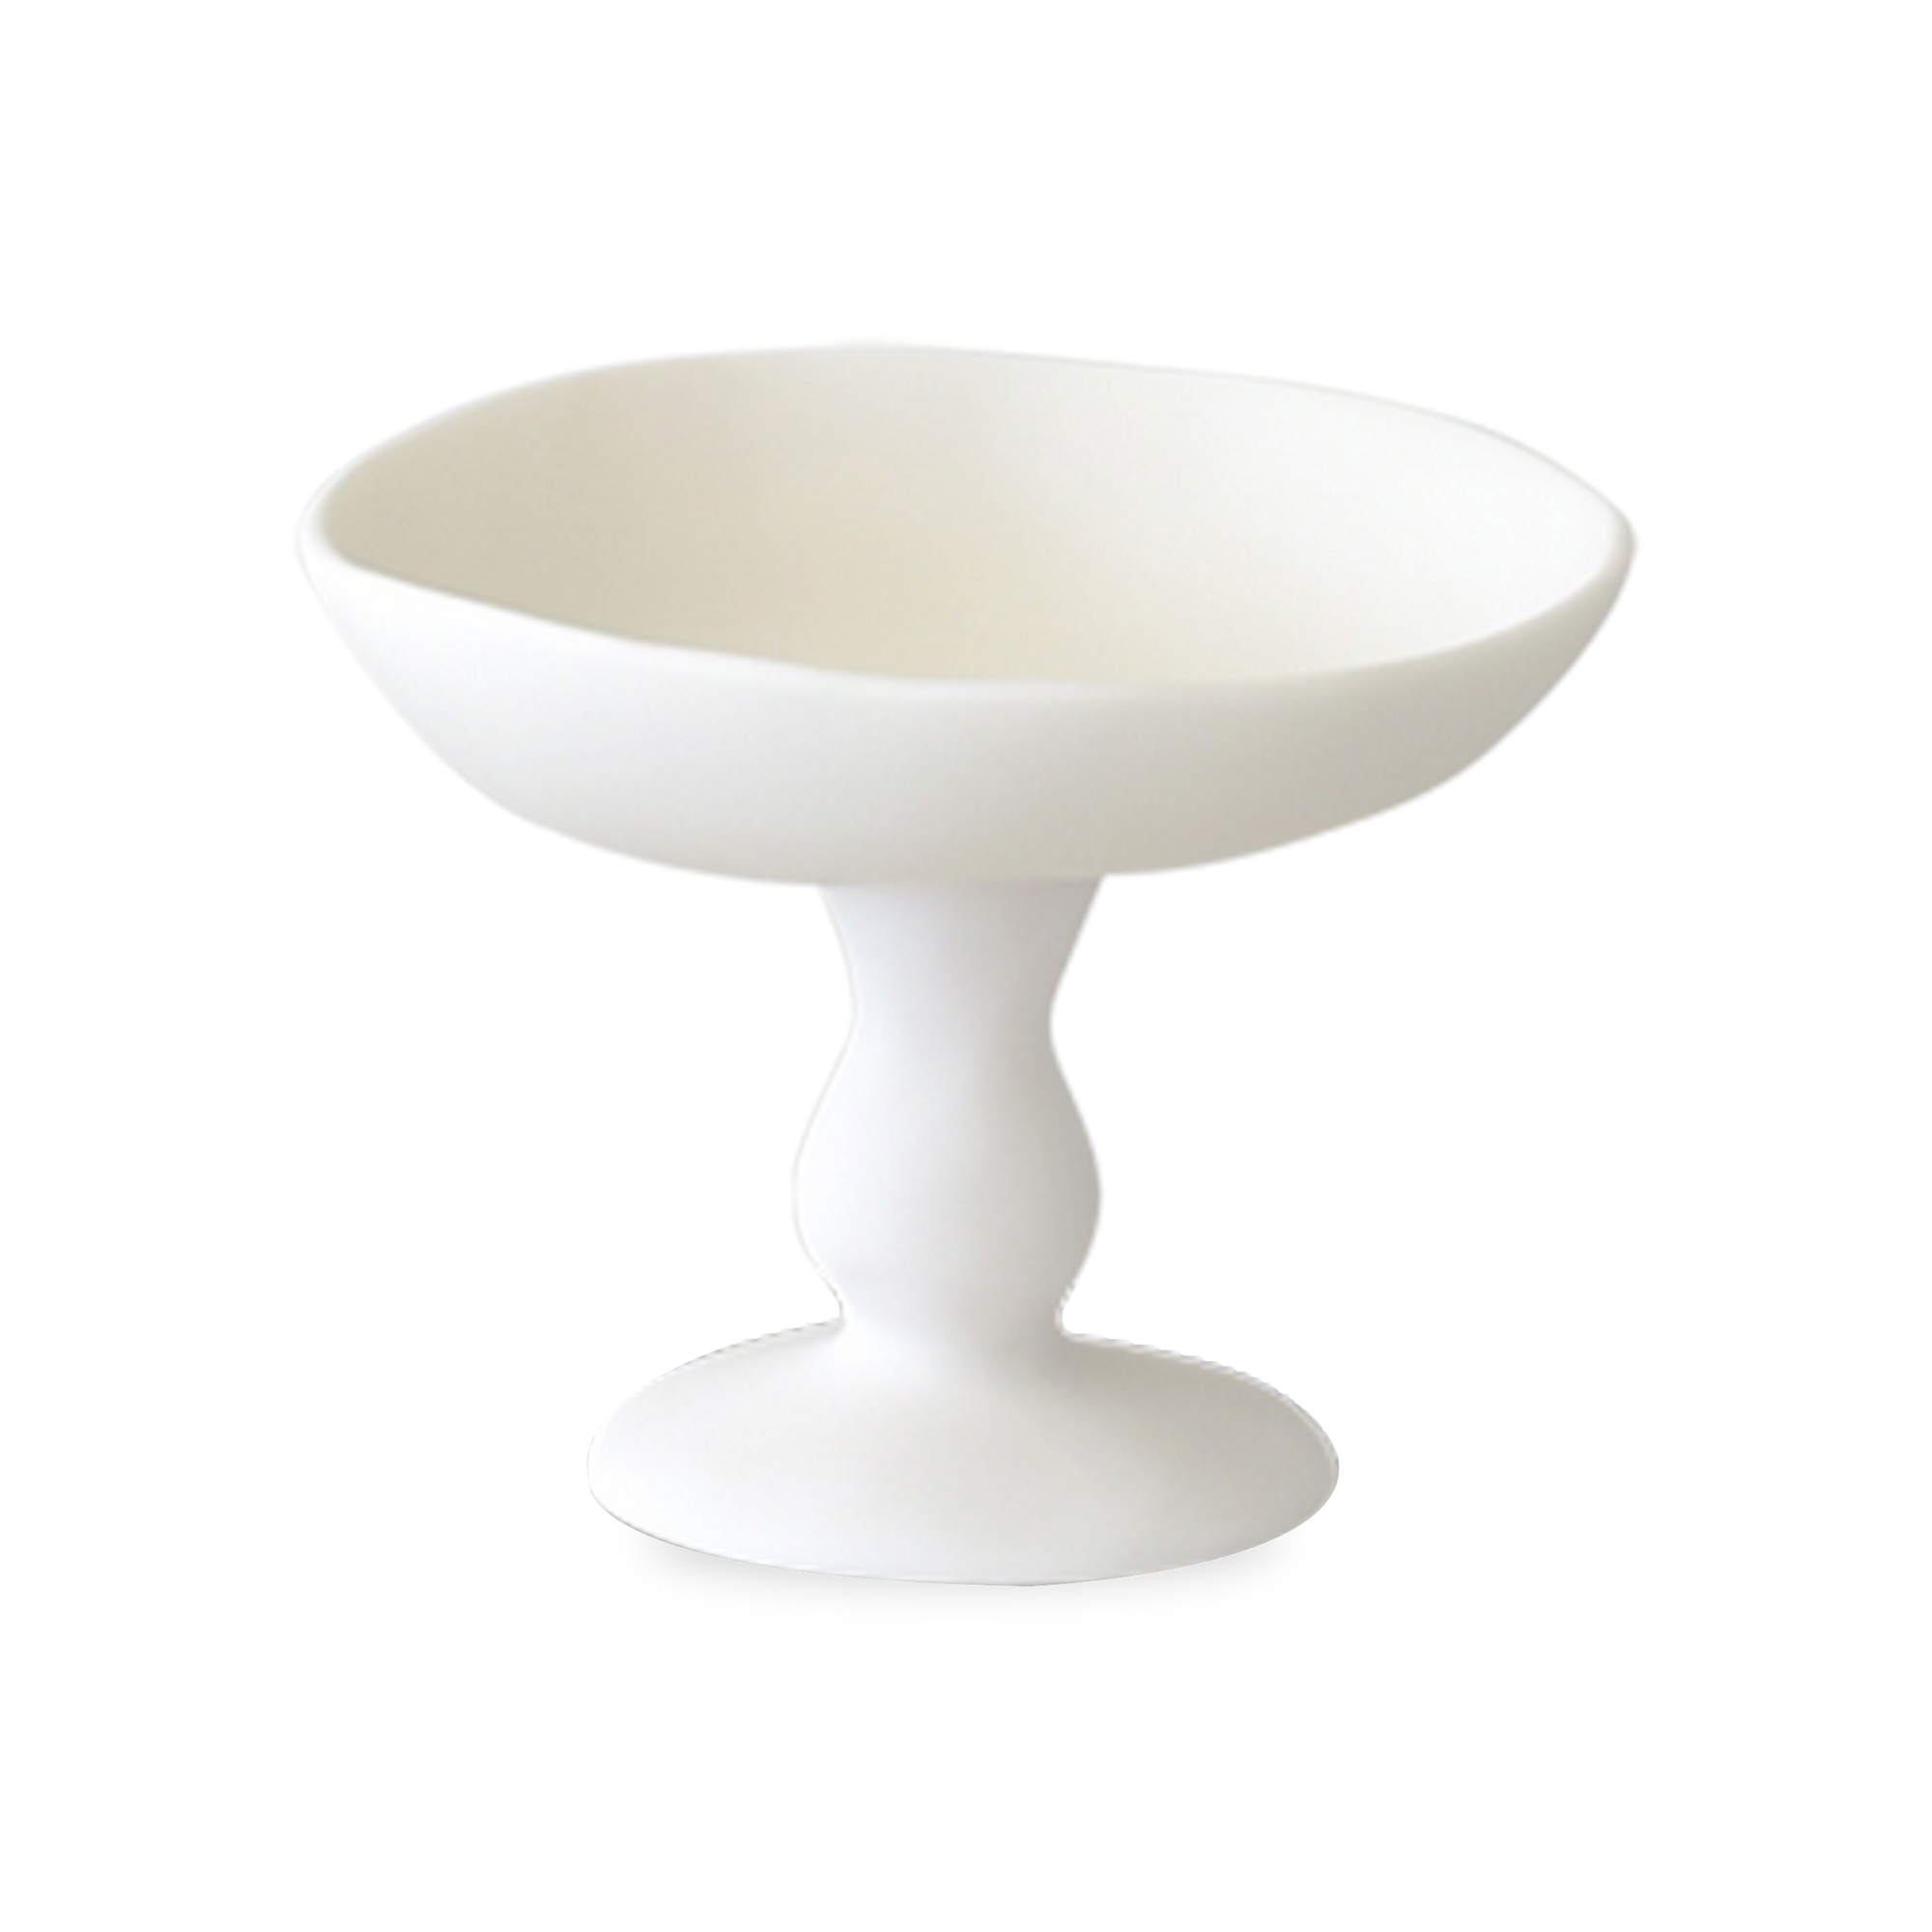 This Pedestal Bowl is made of lead and BPA-free food-safe resin.